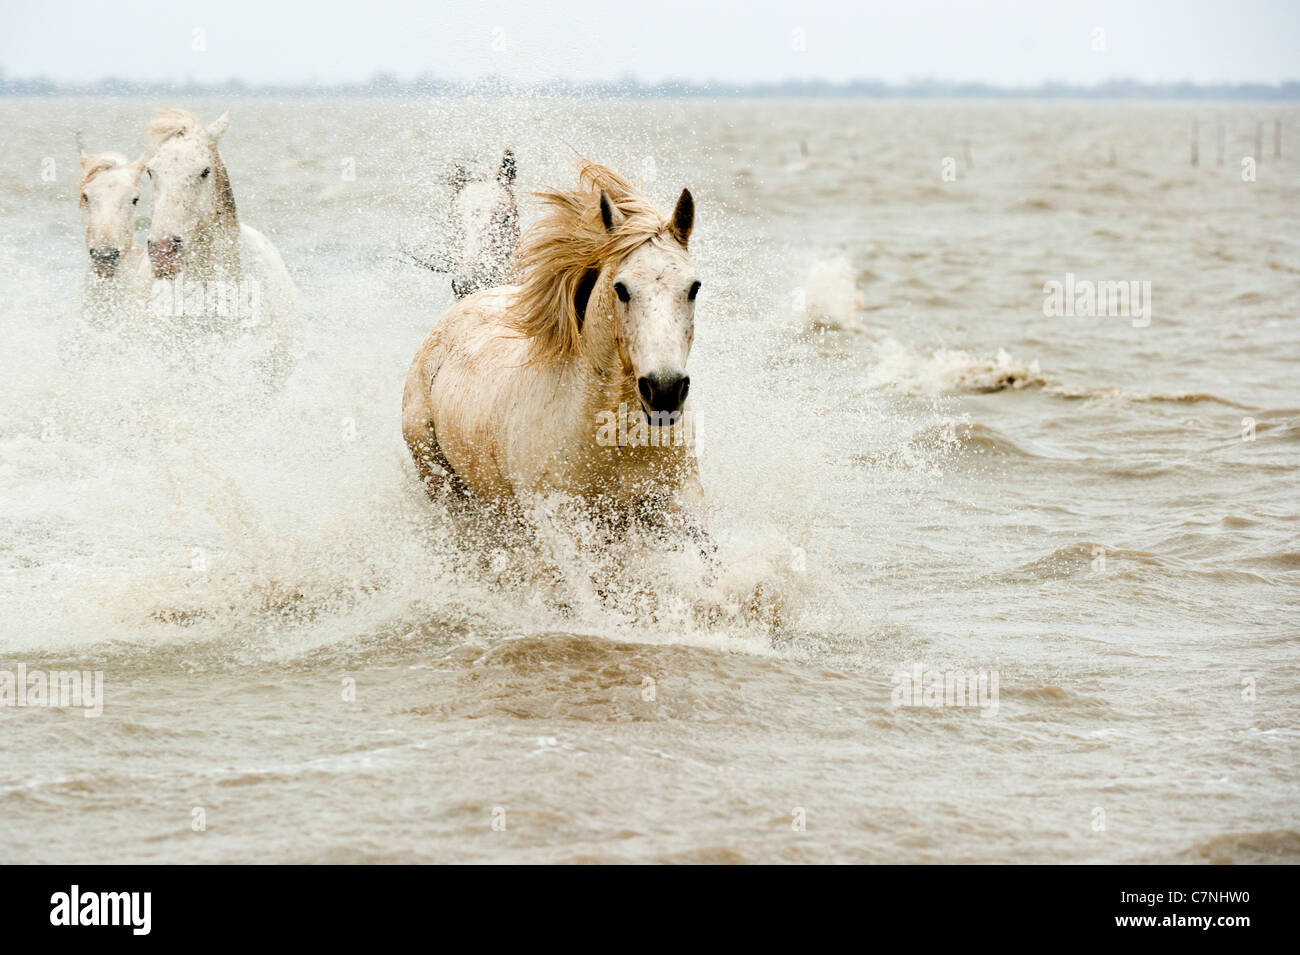 Chevaux Camargue in sea Banque D'Images